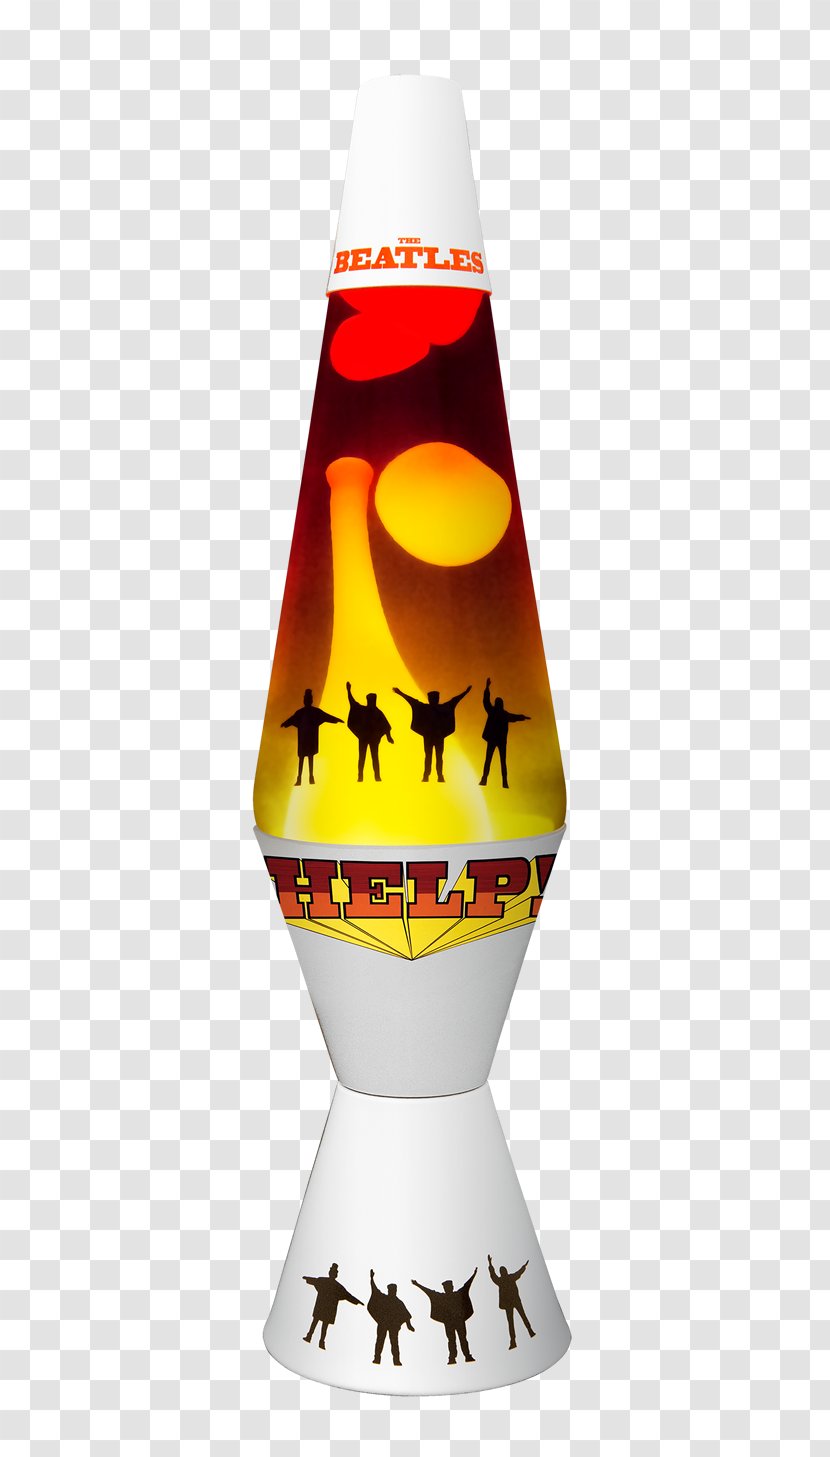 Lava Lamp The Beatles Help! Sgt. Pepper's Lonely Hearts Club Band Yellow Submarine - Rubber Soul - Light Transparent PNG